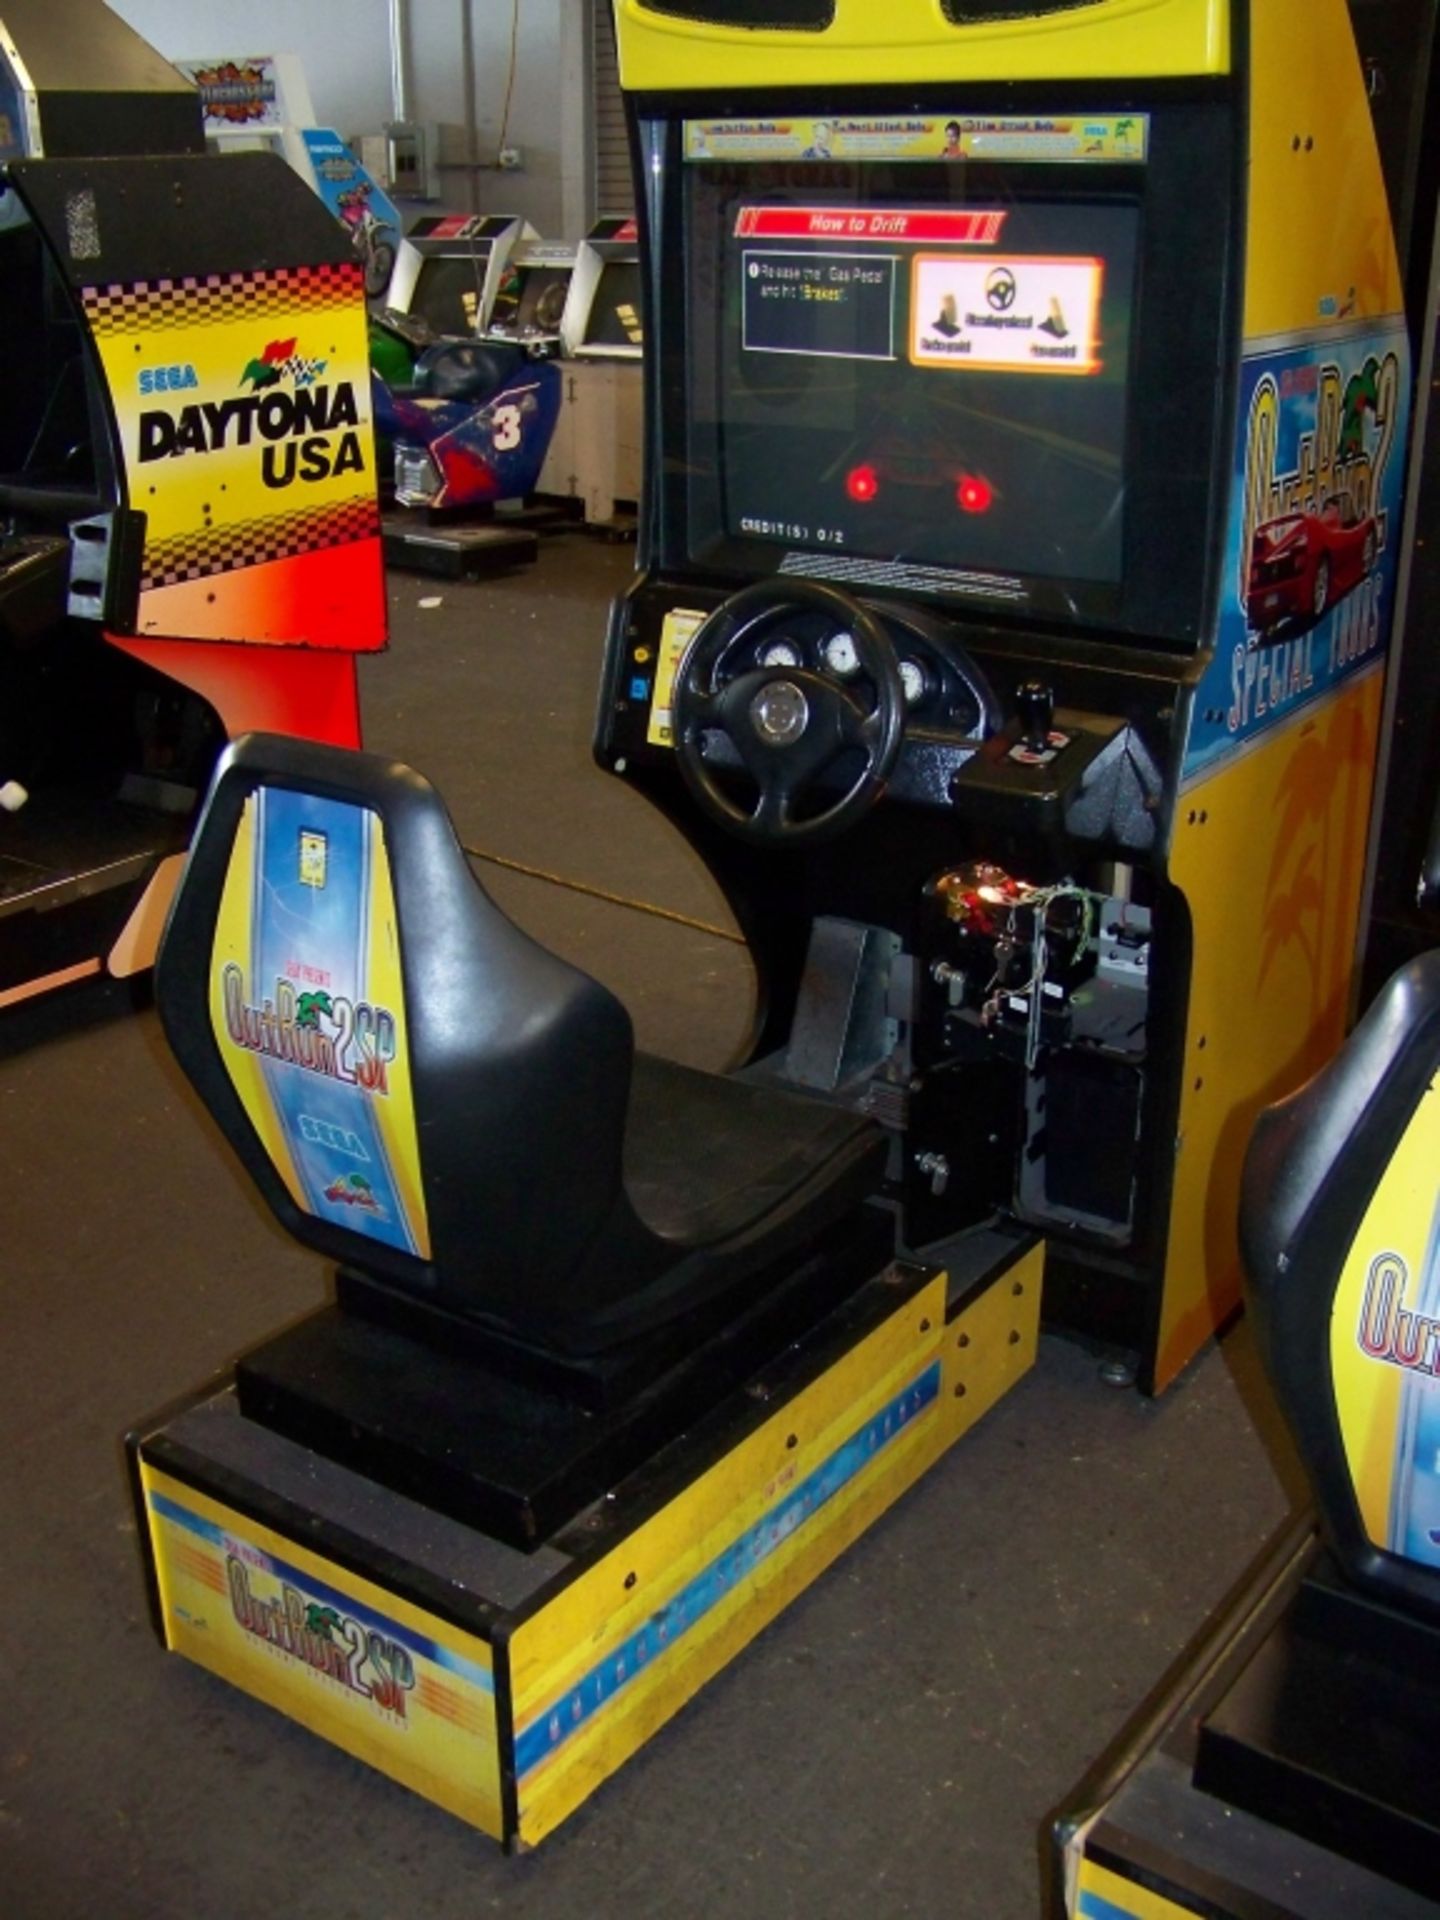 OUTRUN 2 SPECIAL EDITION RACING ARCADE GAME SEGA Item is in used condition. Evidence of wear and - Image 7 of 9